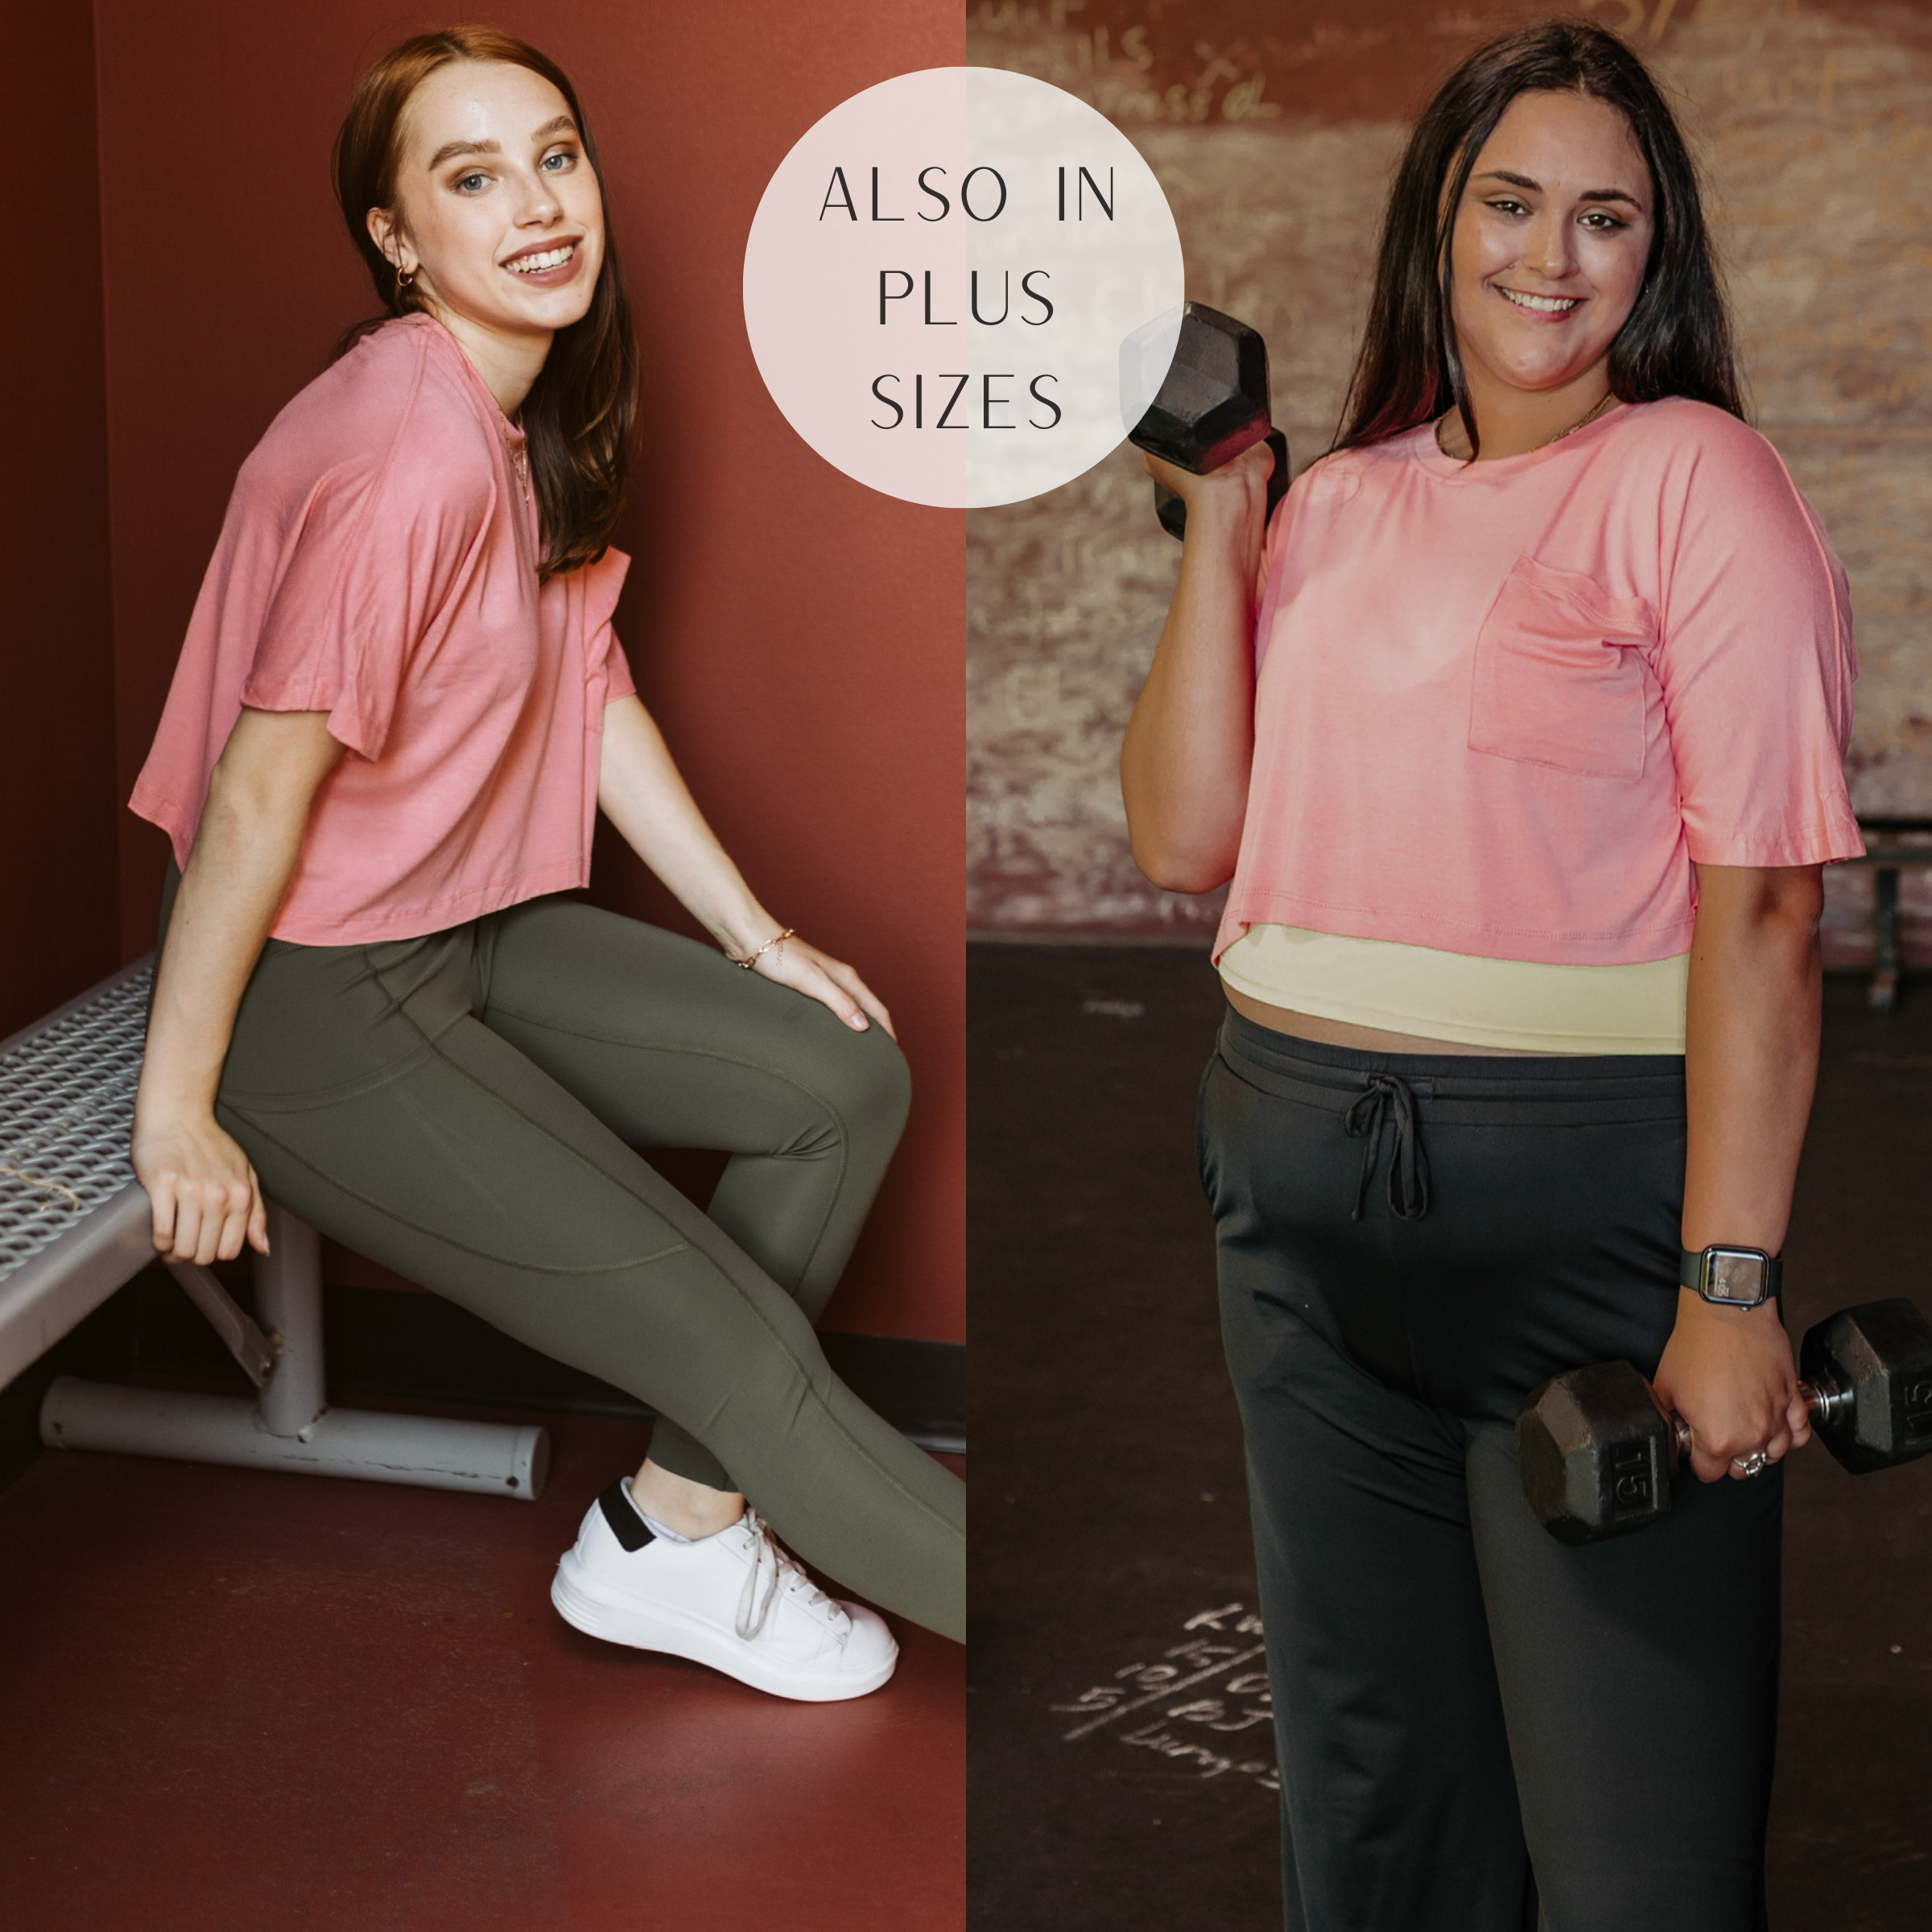 Models are wearing a coral short sleeve crop top with a front pocket. Size small model has it paired with olive green leggings and white sneakers. Plus size model has it paired with a yellow sports bra and black sweatpants.